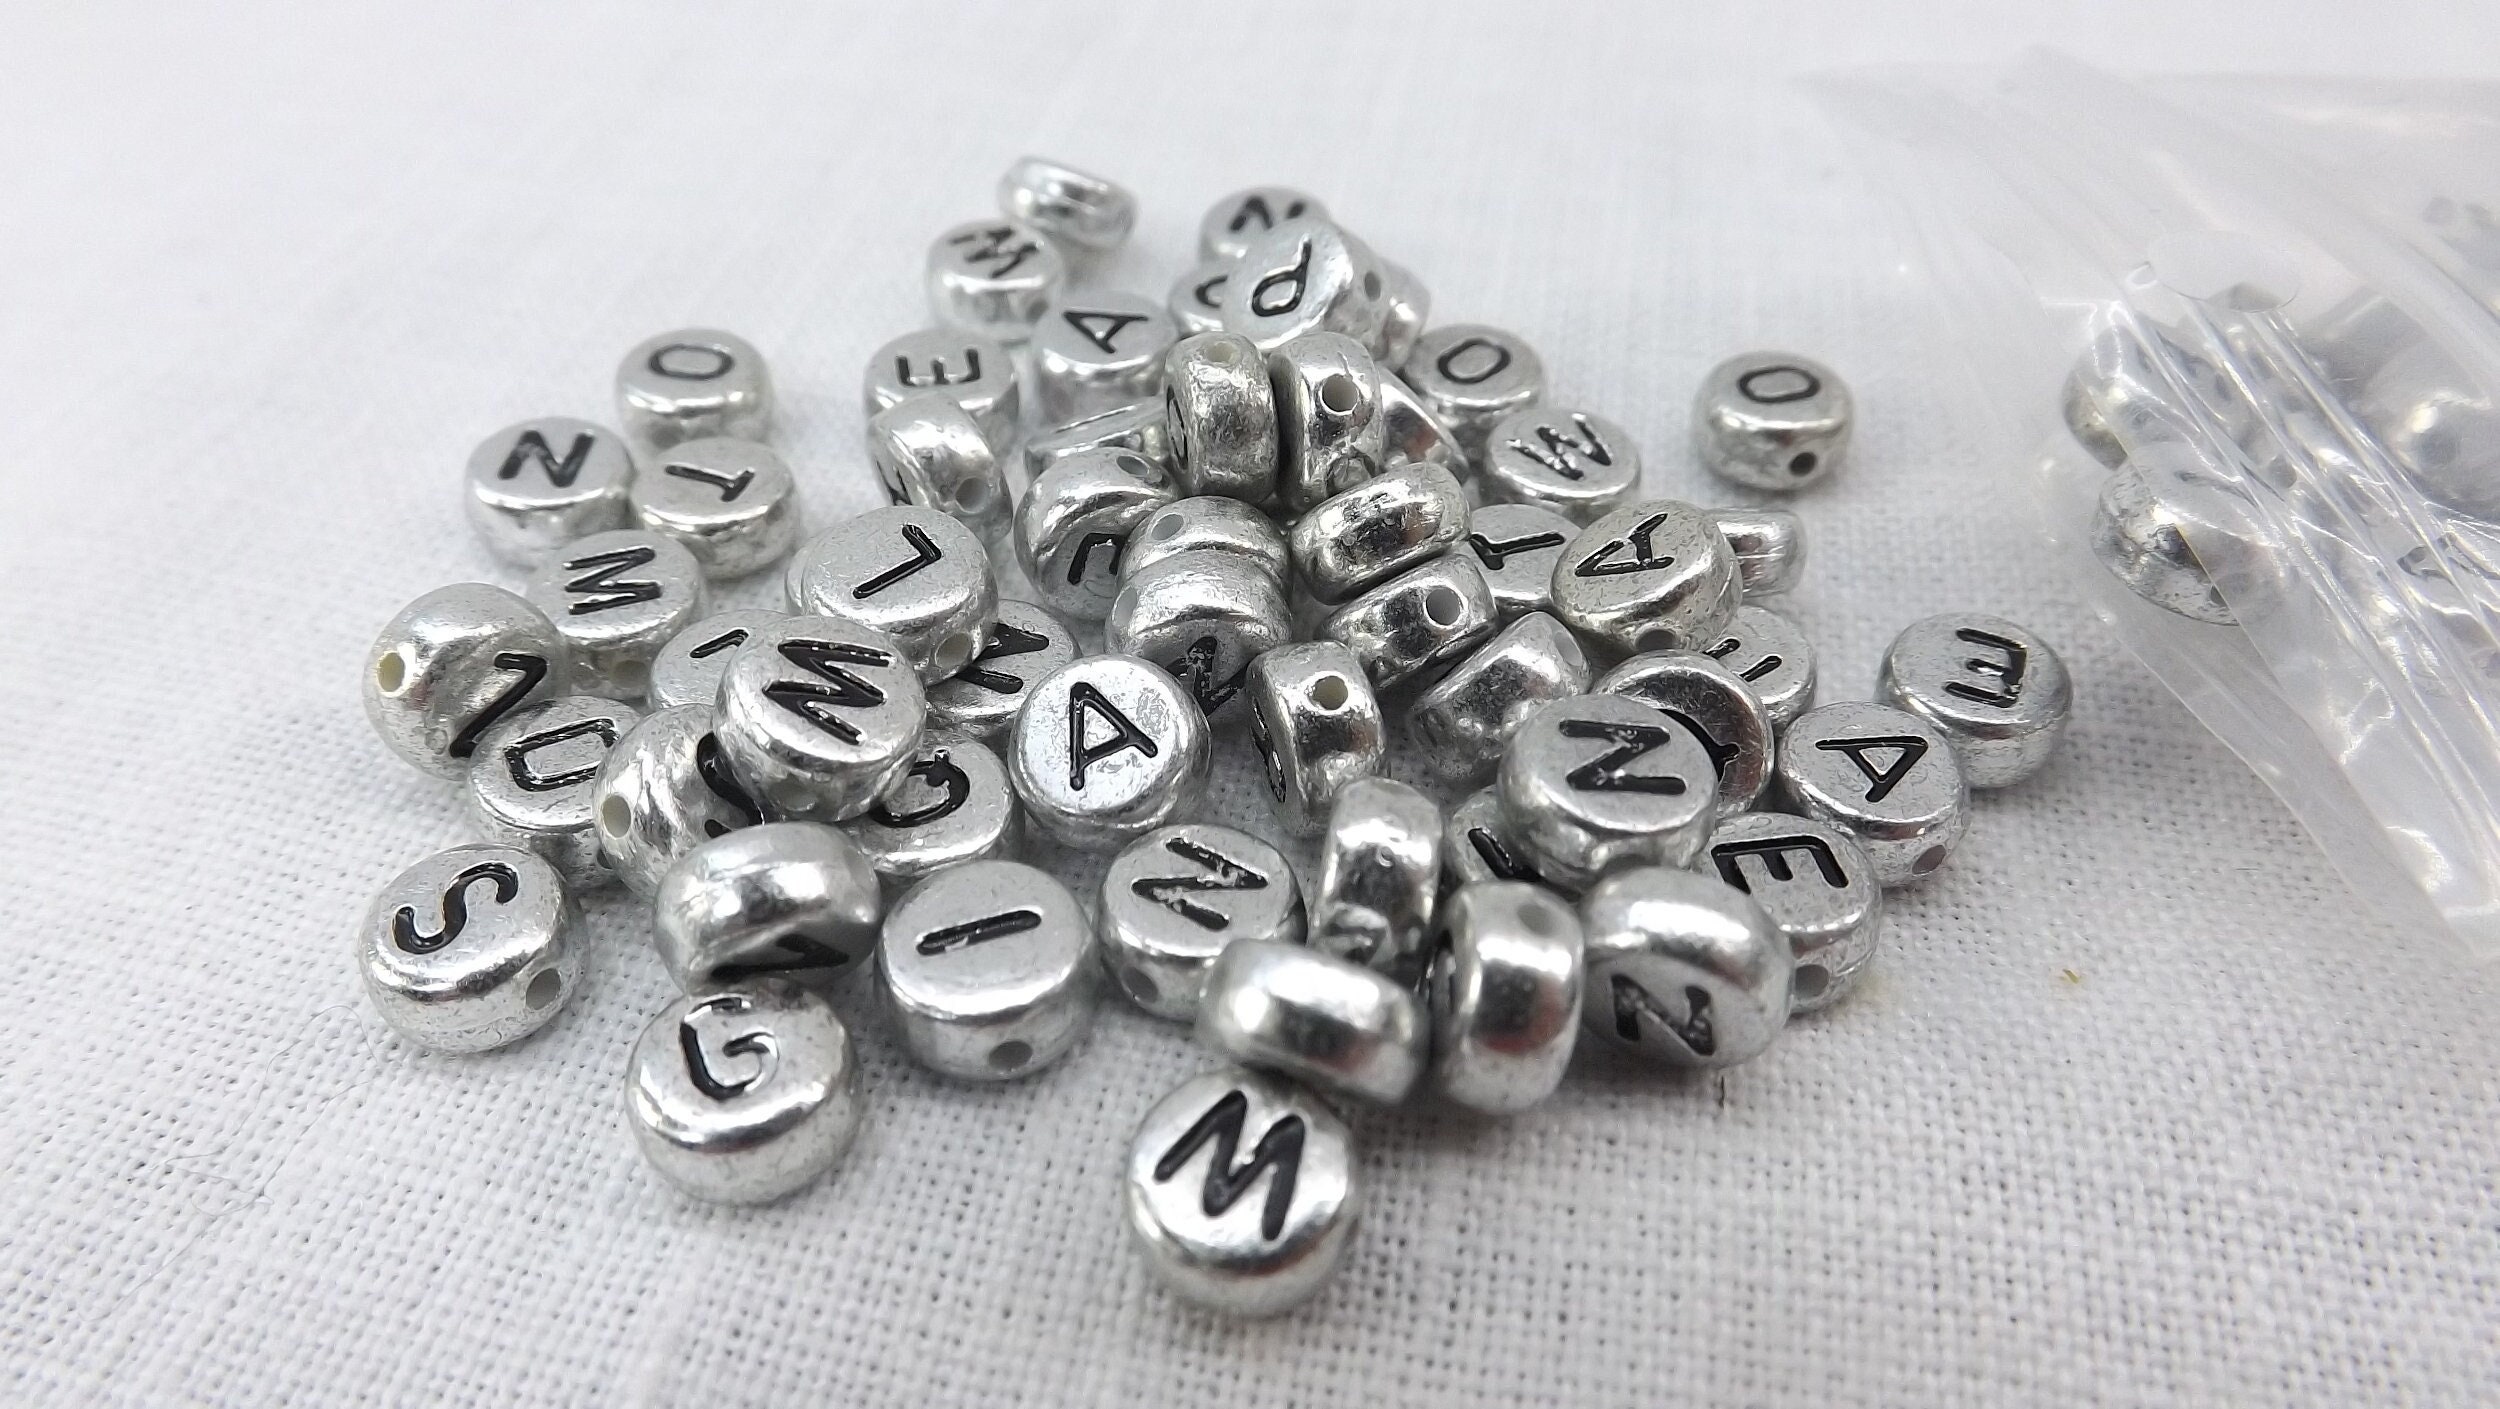  FASHEWELRY 200Pcs Transparent Acrylic Letter Beads 7x4mm Flat  Round Alphabet A-Z Spacer Beads for DIY Necklace Bracelet Jewelry Making :  Arts, Crafts & Sewing